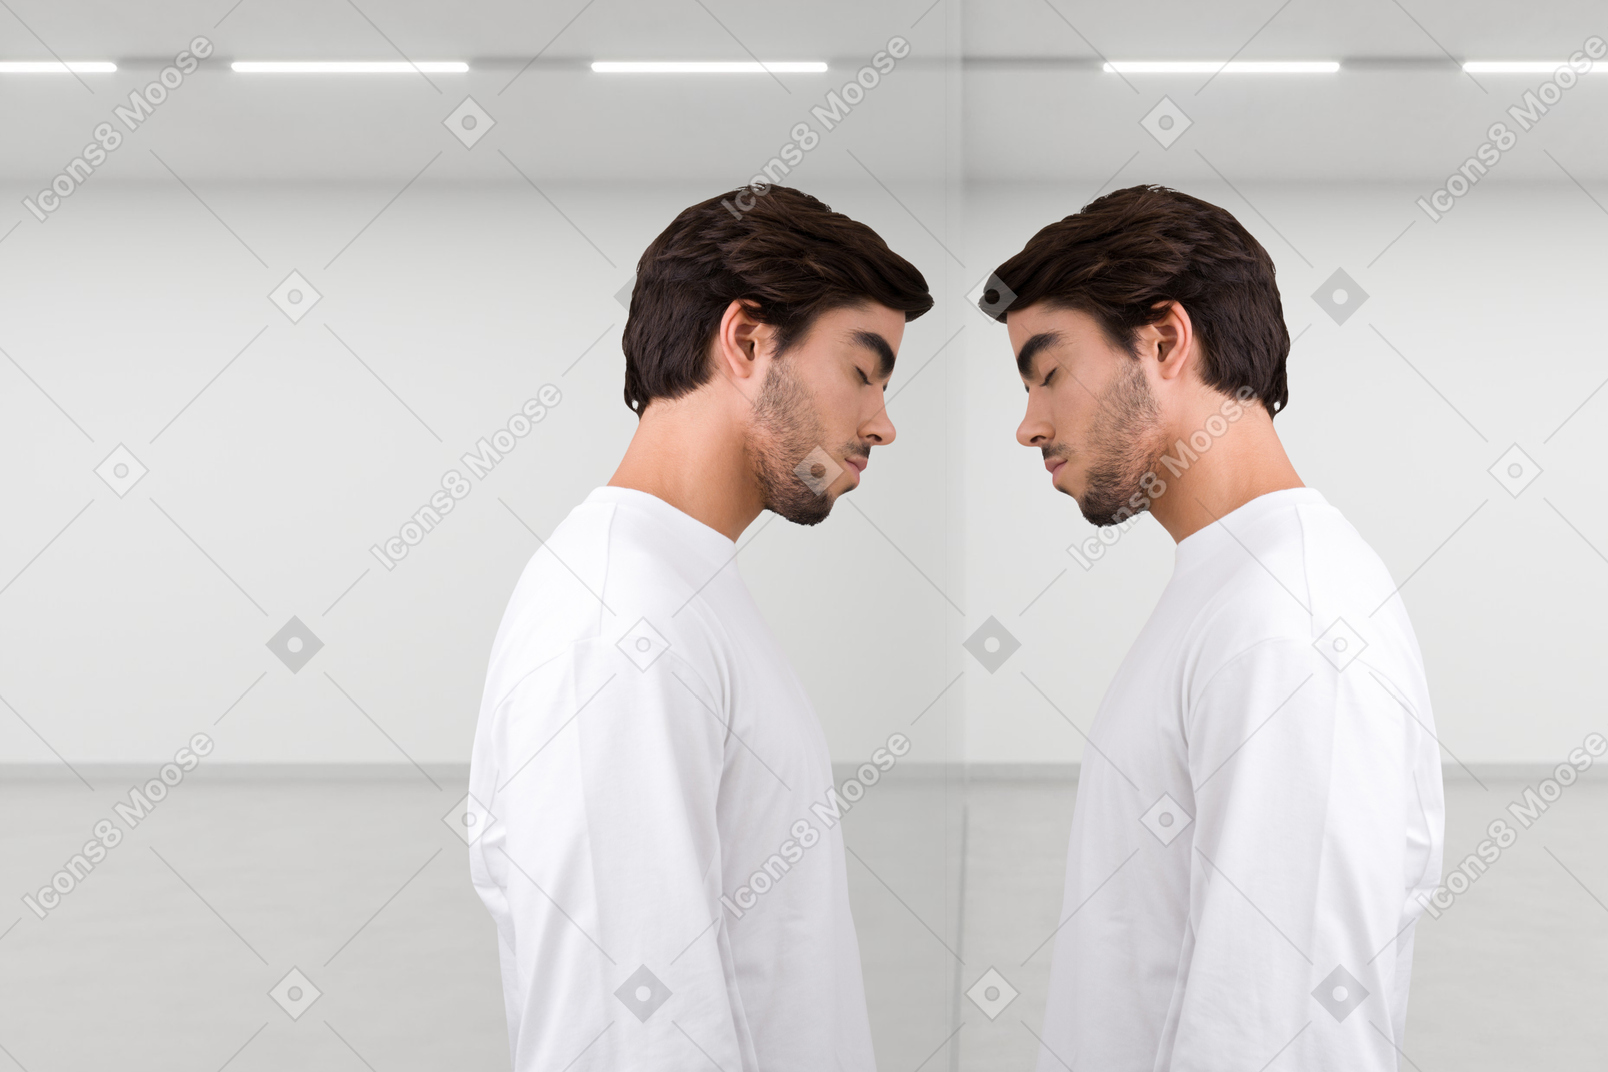 Man standing with closed eyes near his reflection